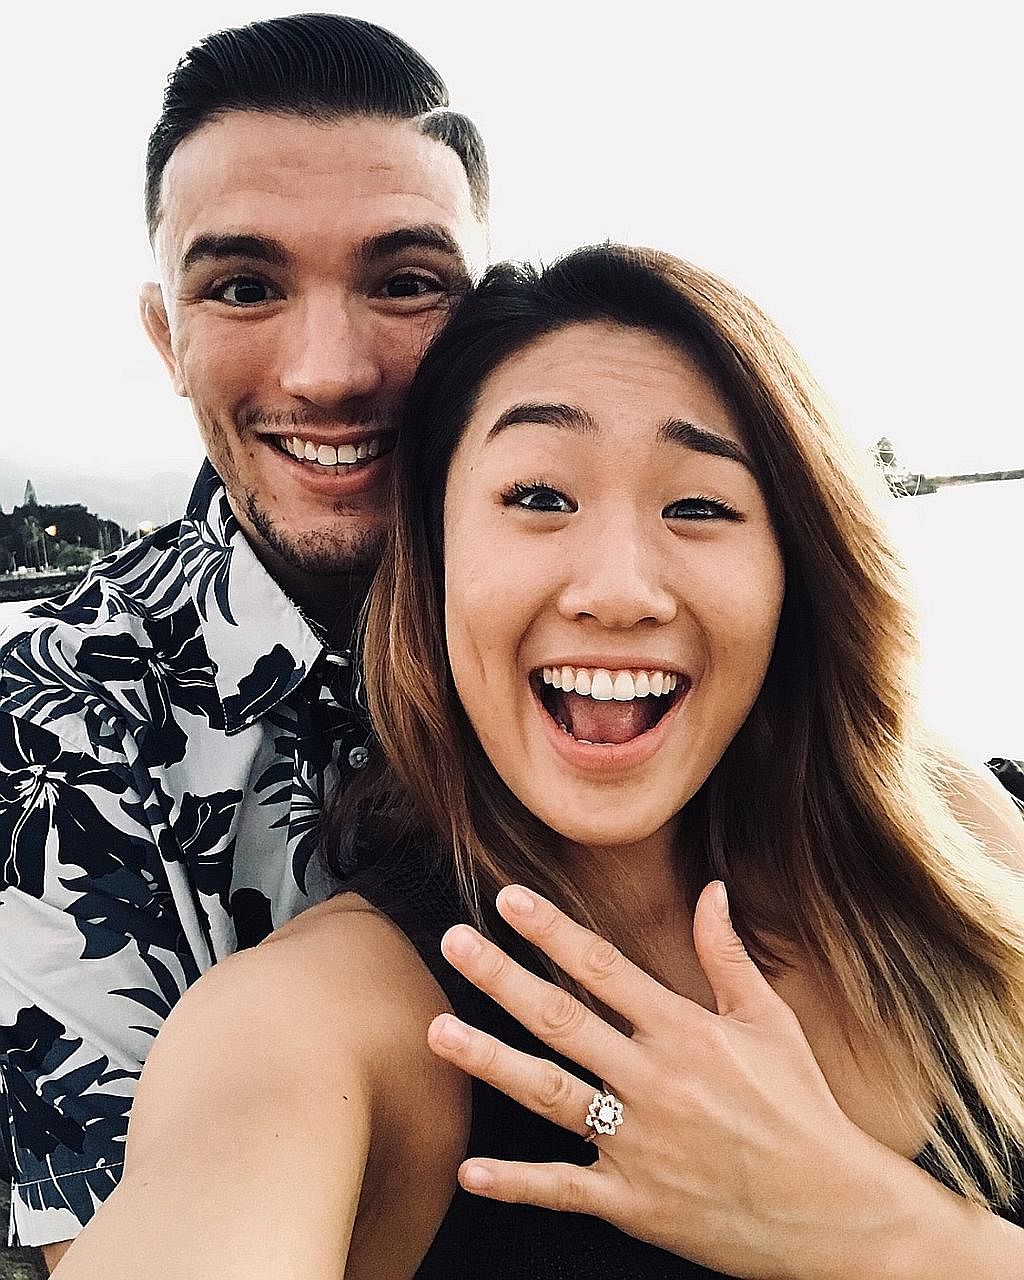 Canadian One Championship star Angela Lee showing off her engagement ring after saying yes to Bruno Pucci at Beachhouse, North Shore, Haleiwa.